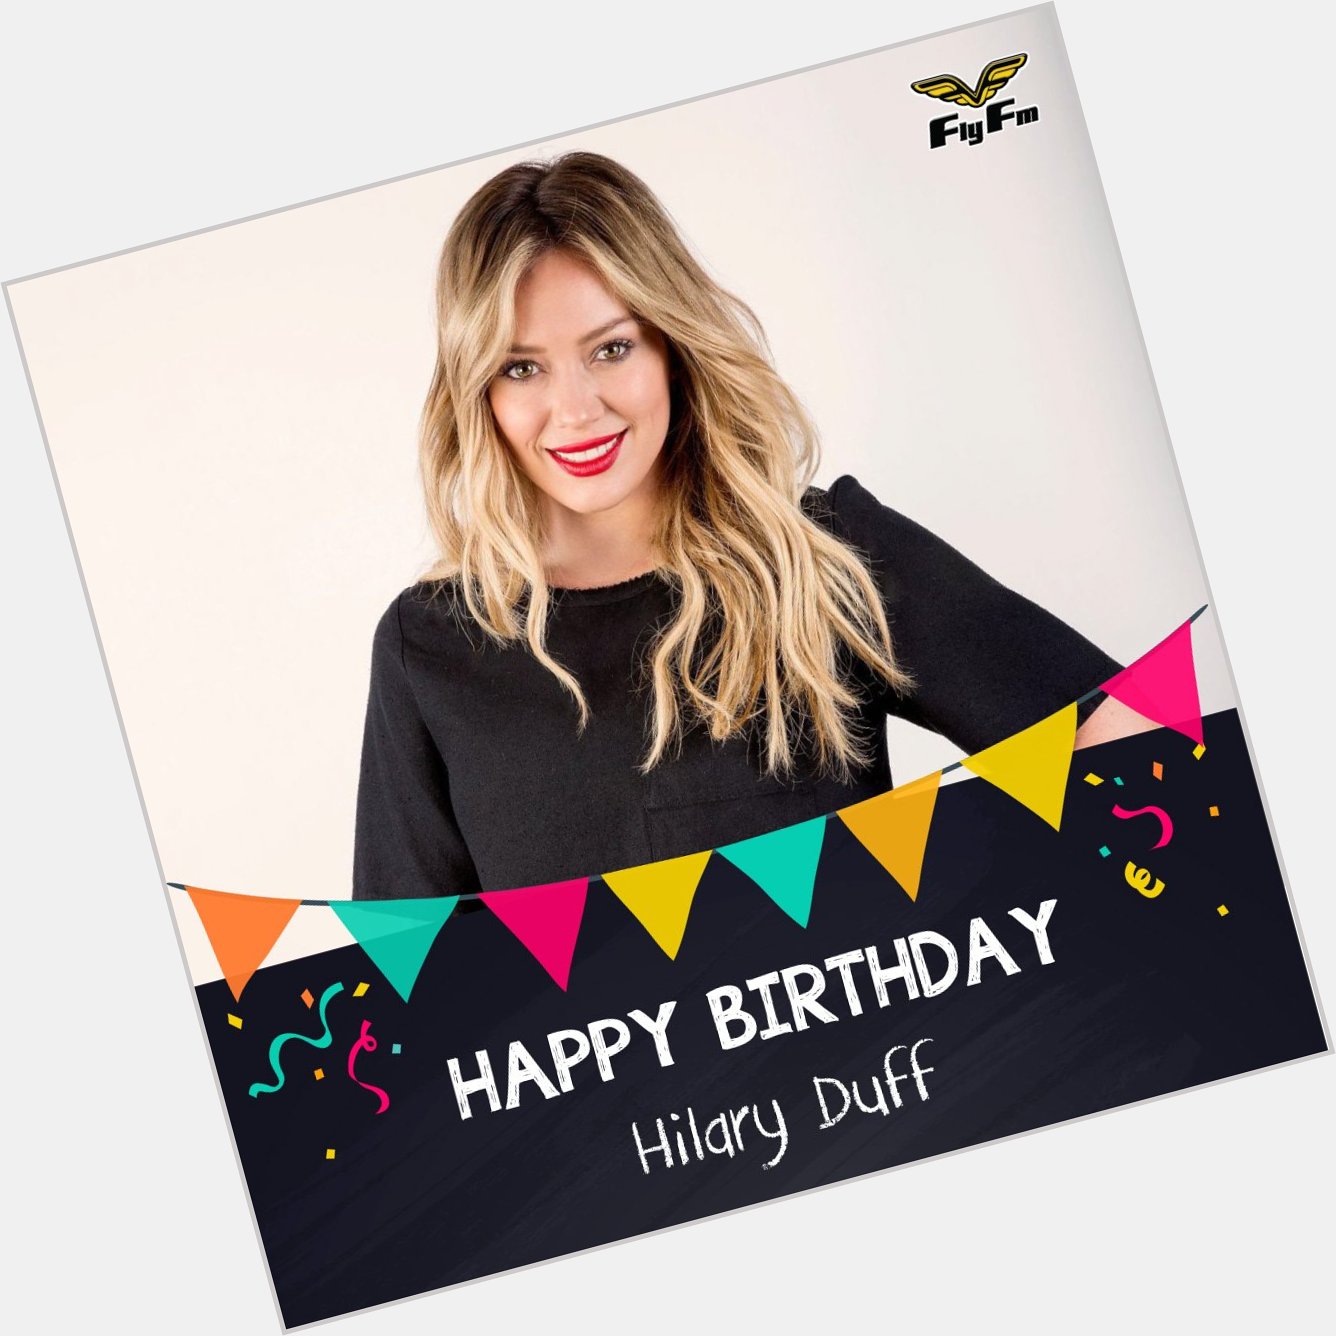 Why not take a crazy chance and join us as we wish Hilary Duff a very HAPPY 30th BIRTHDAY!! 